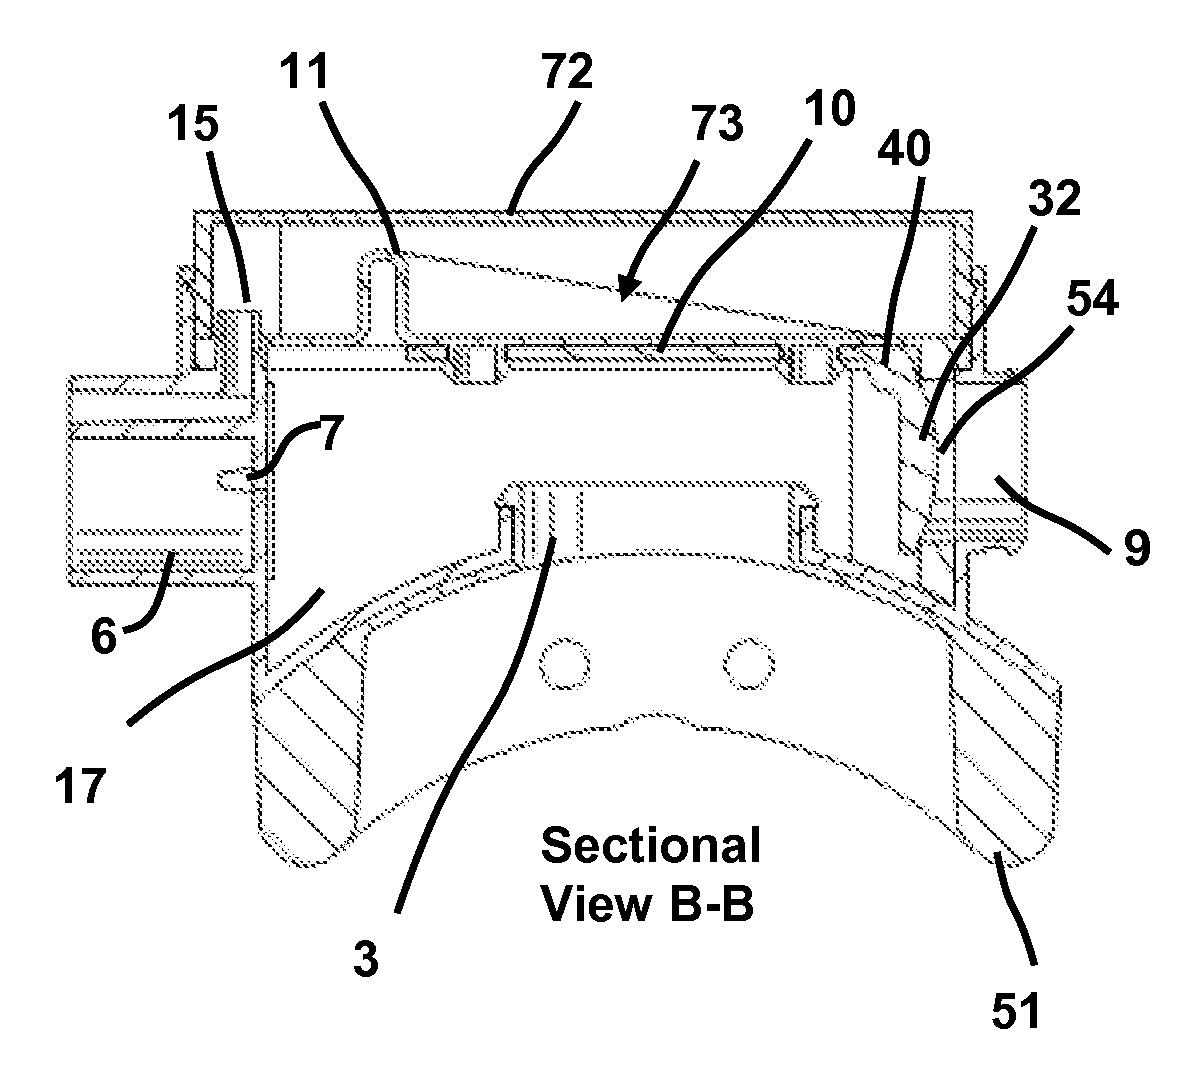 Exhaust Apparatus For Use in Administering Positive Pressure Therapy Through the Nose or Mouth